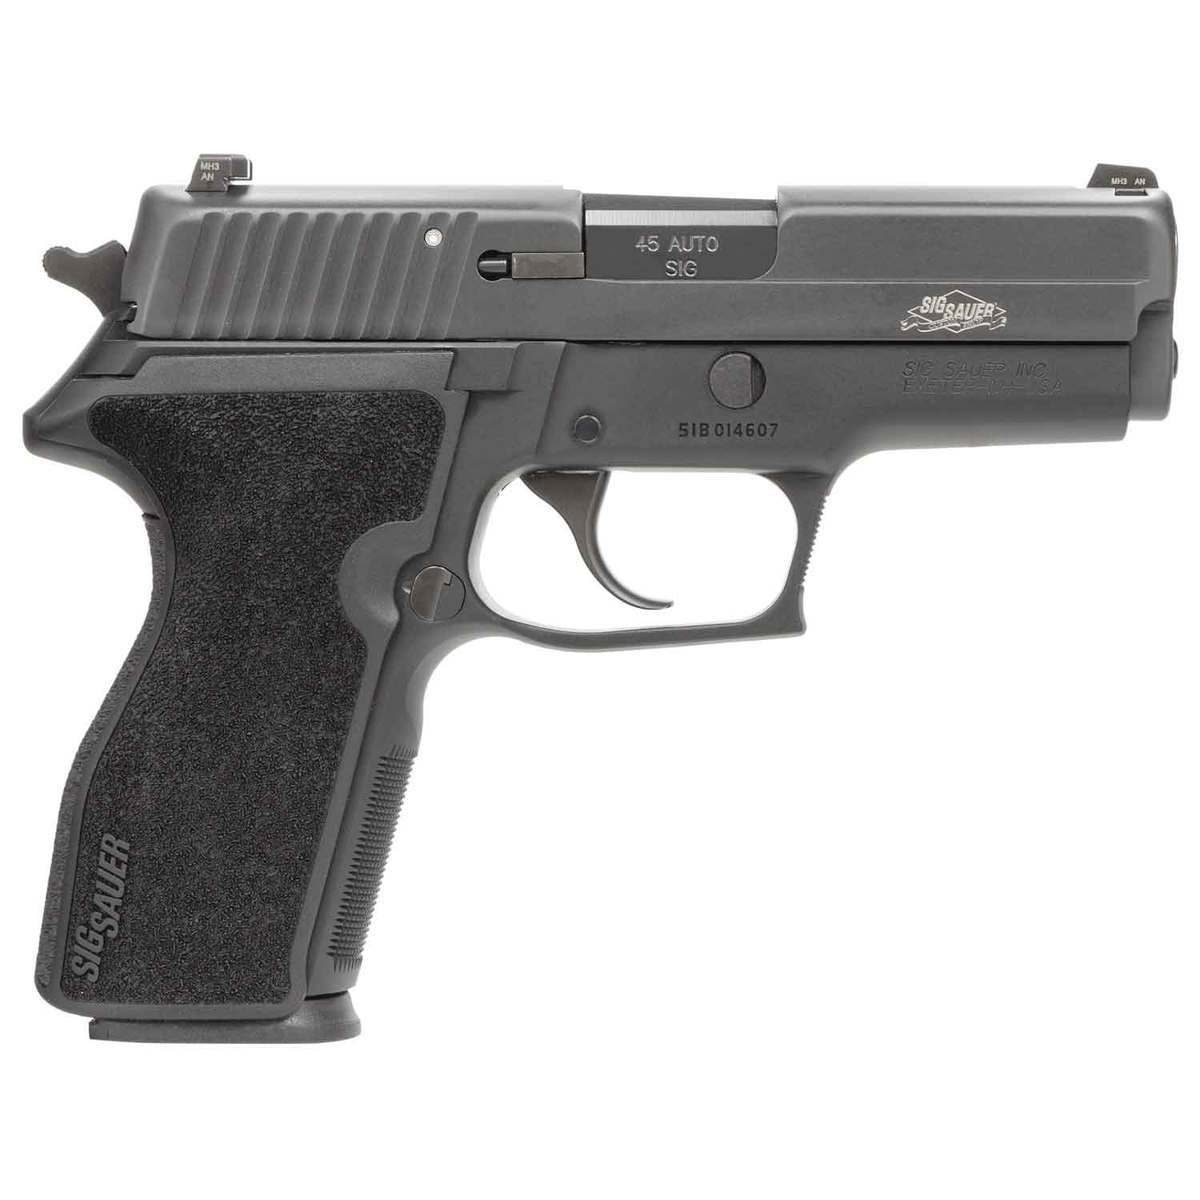 Sig Sauer P227 Gen 2 Review: Pros and cons of the P227 Gen 2